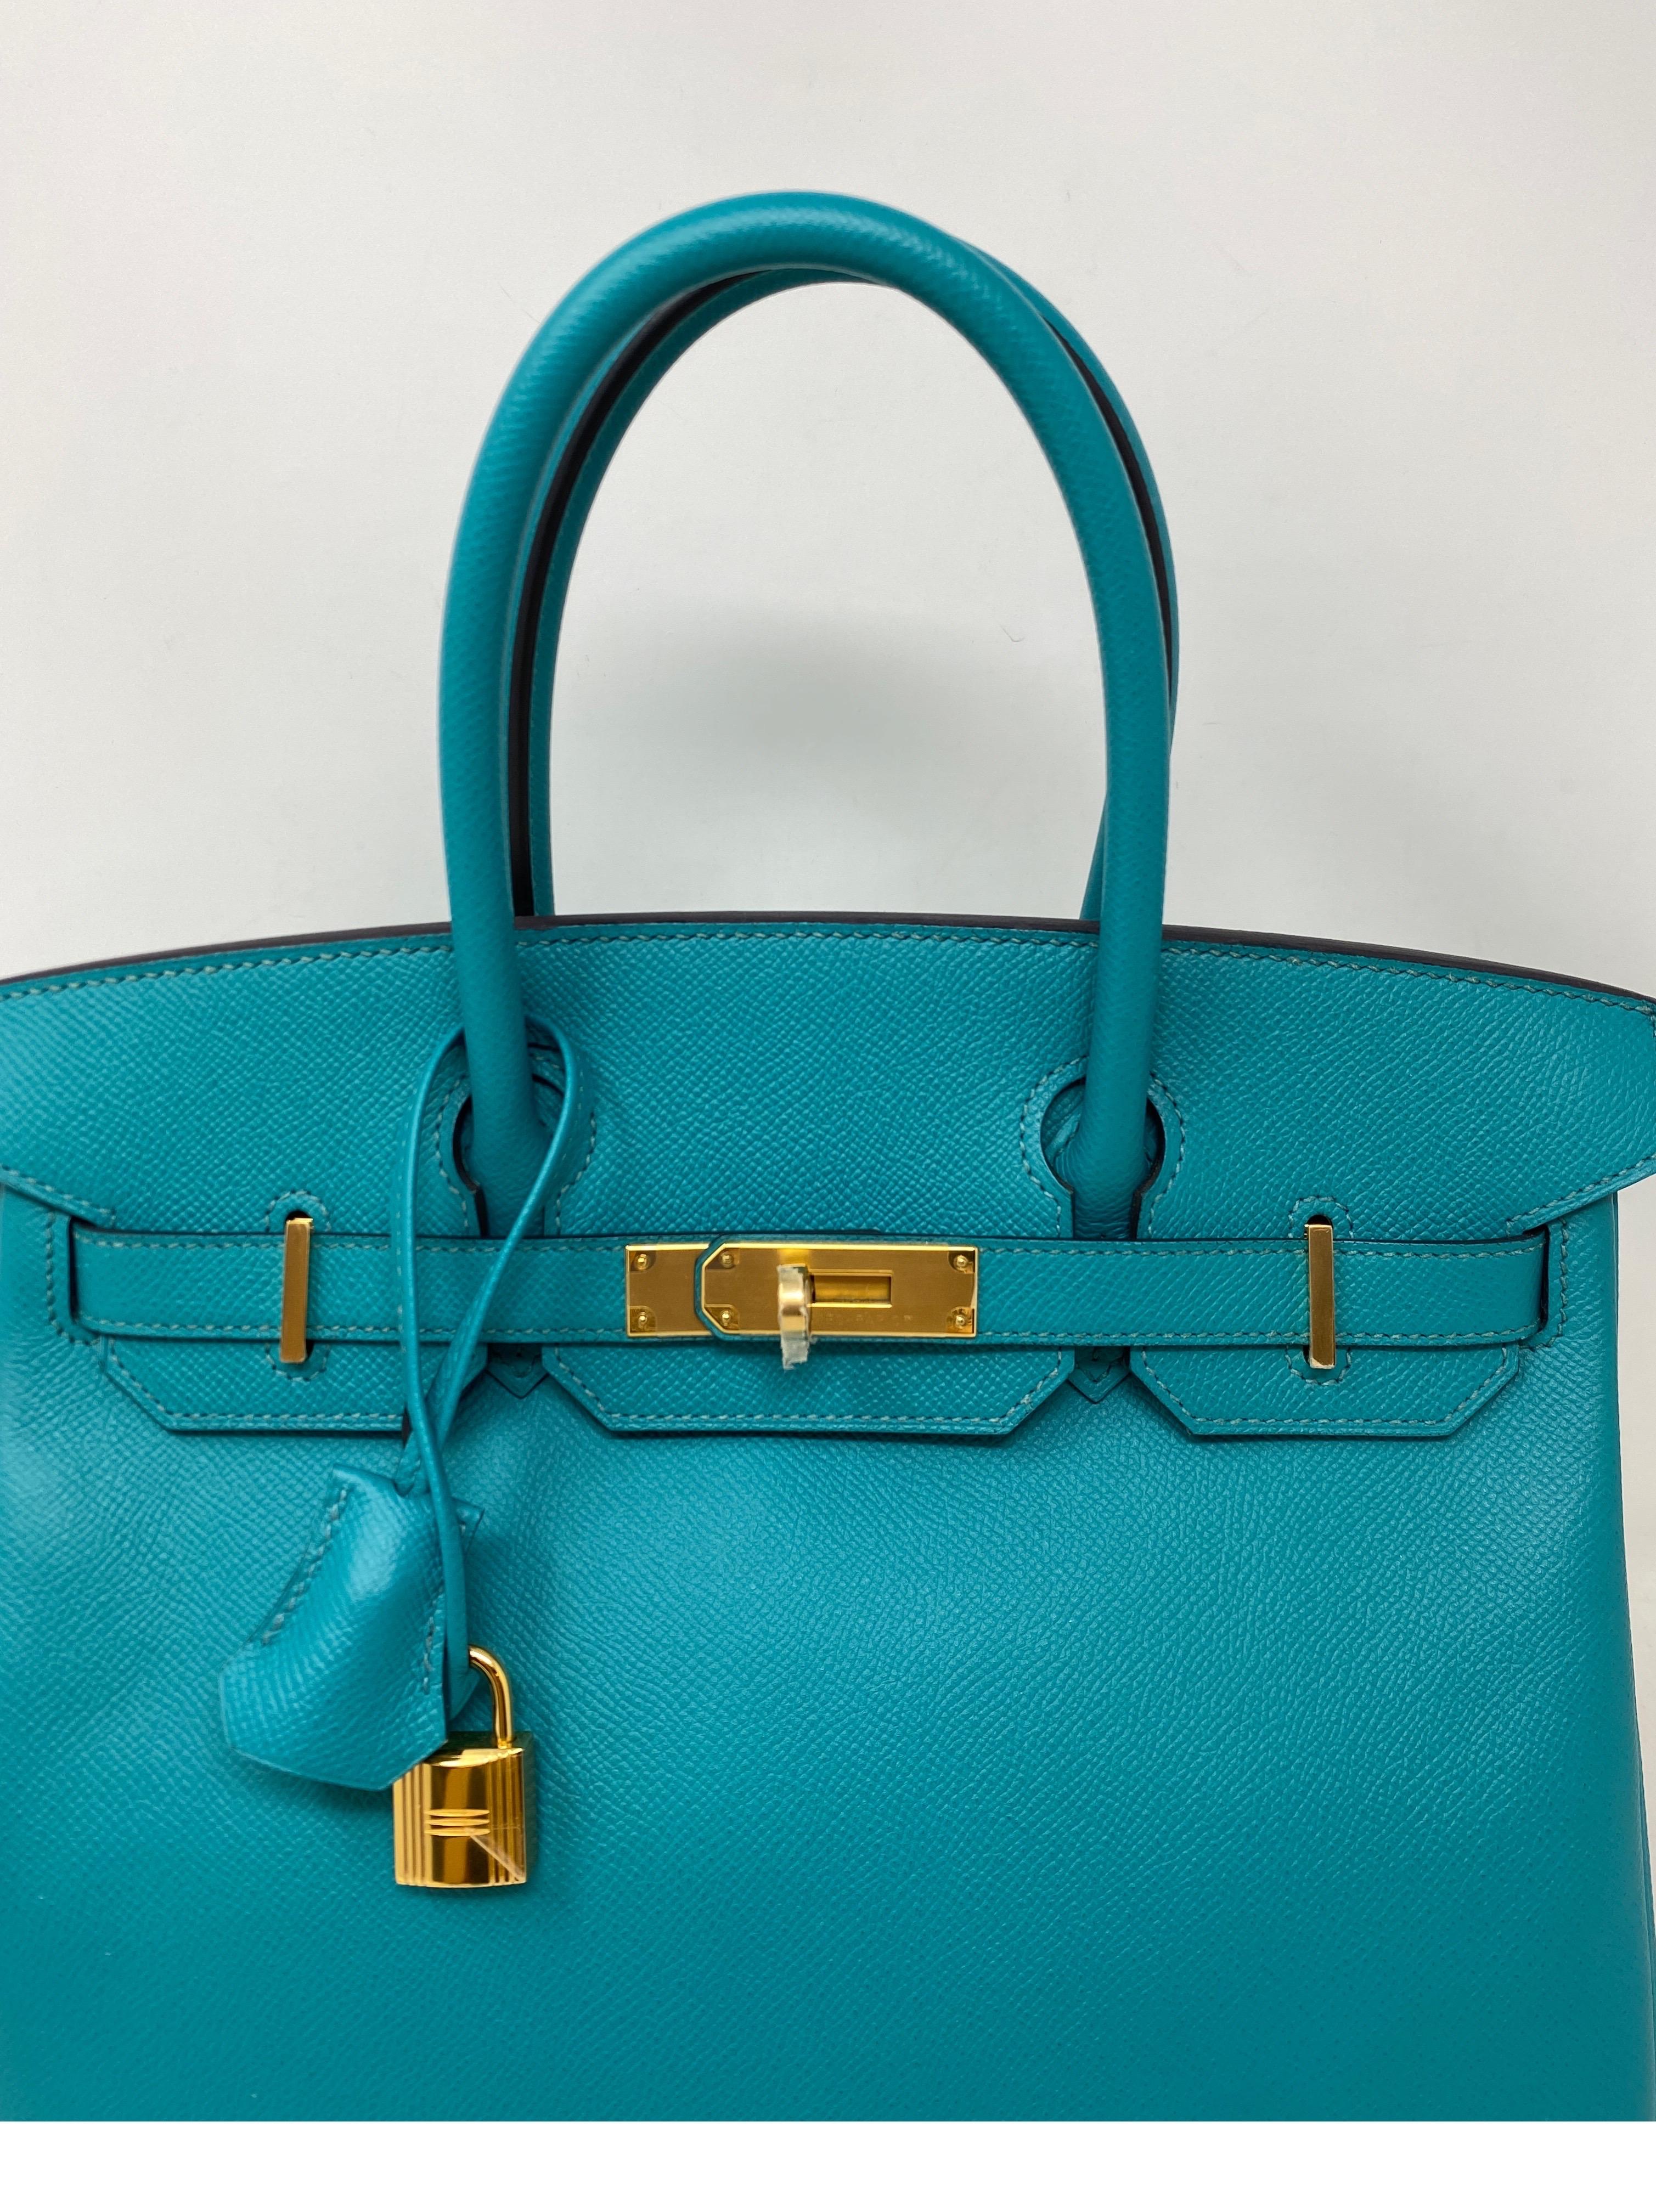 Hermes Vert Veronese Birkin 30 Bag. Beautiful turqoise teal color. Rare color and size. Gold hardware. Excellent like new condition. Epsom leather. Won't last. Includes clochette, lock, keys, and dust bag. Guaranteed authentic. 